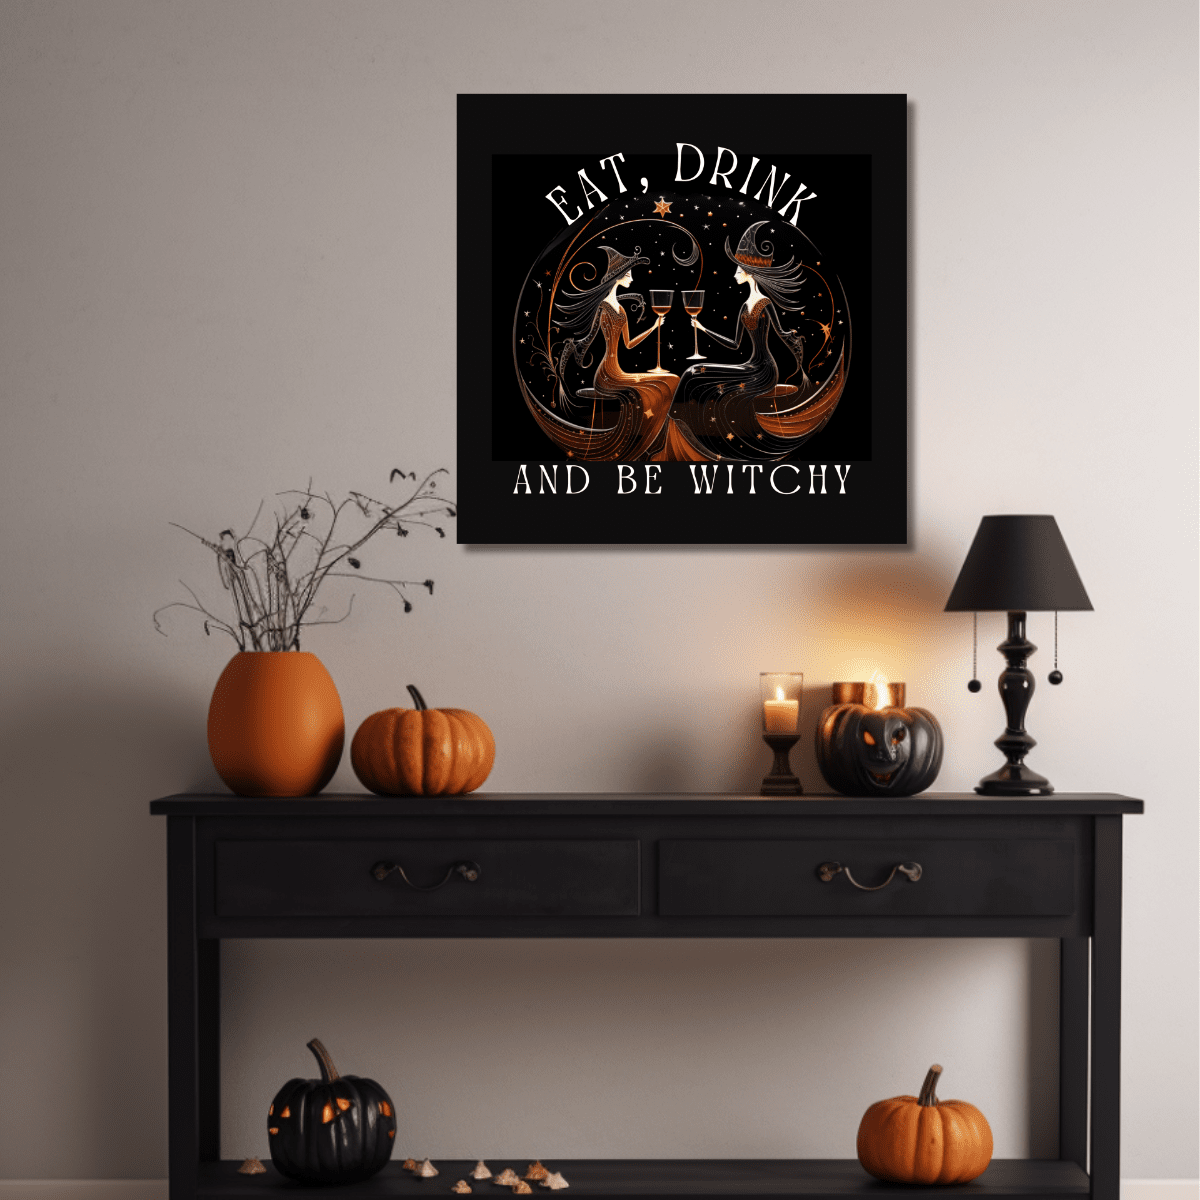 Samhain Halloween Indoor Decor Samhain Art Witchy Decor Aesthetic Wiccan Housewarming Gift Witchcraft Sign Vintage Fall Wall Art Witches Tea